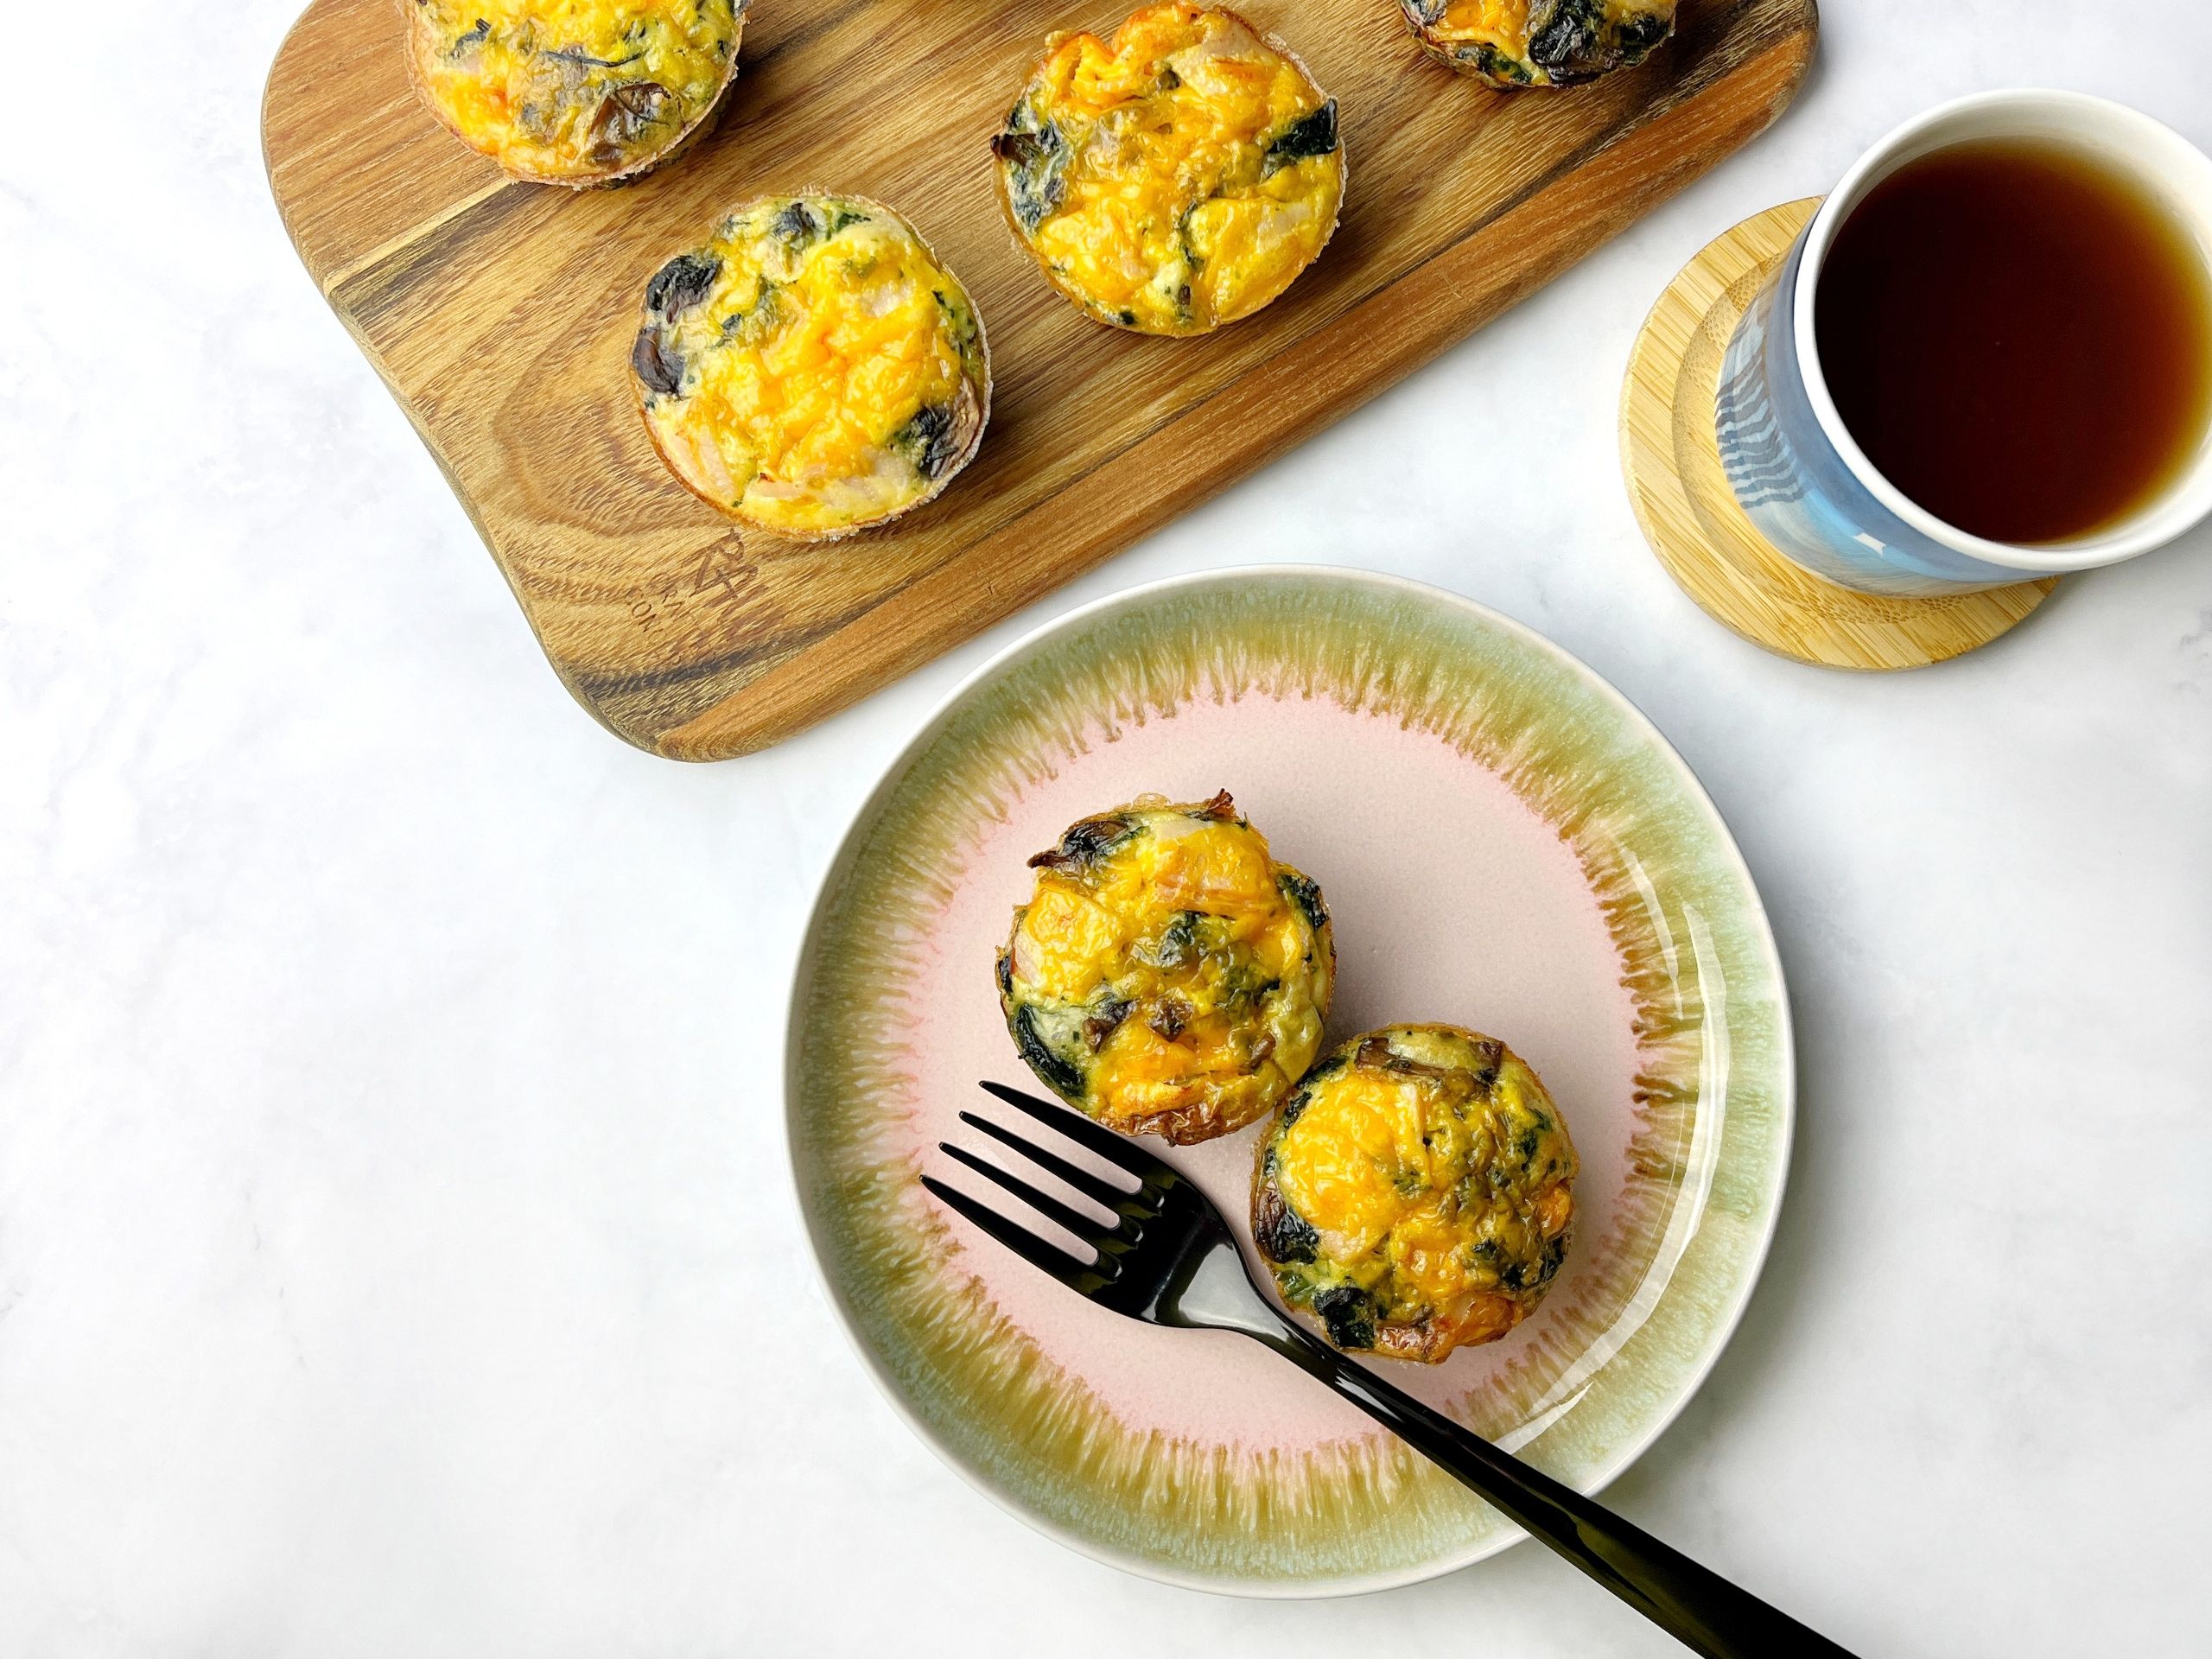 Egg muffins with mushrooms and spinach